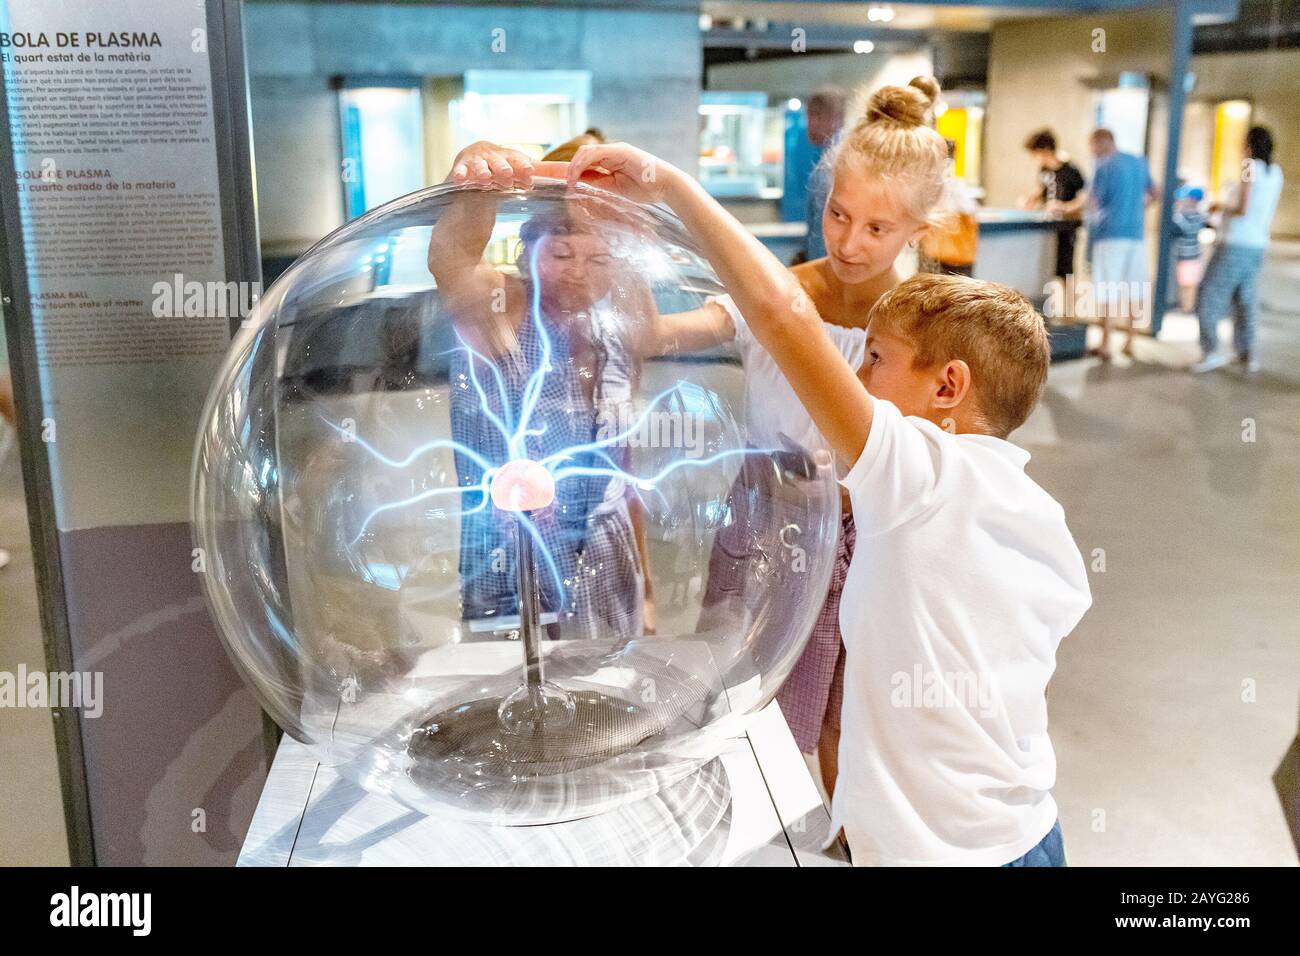 28 JULY 2018, BARCELONA, SPAIN: People playing with Plasma Ball in science museum Stock Photo